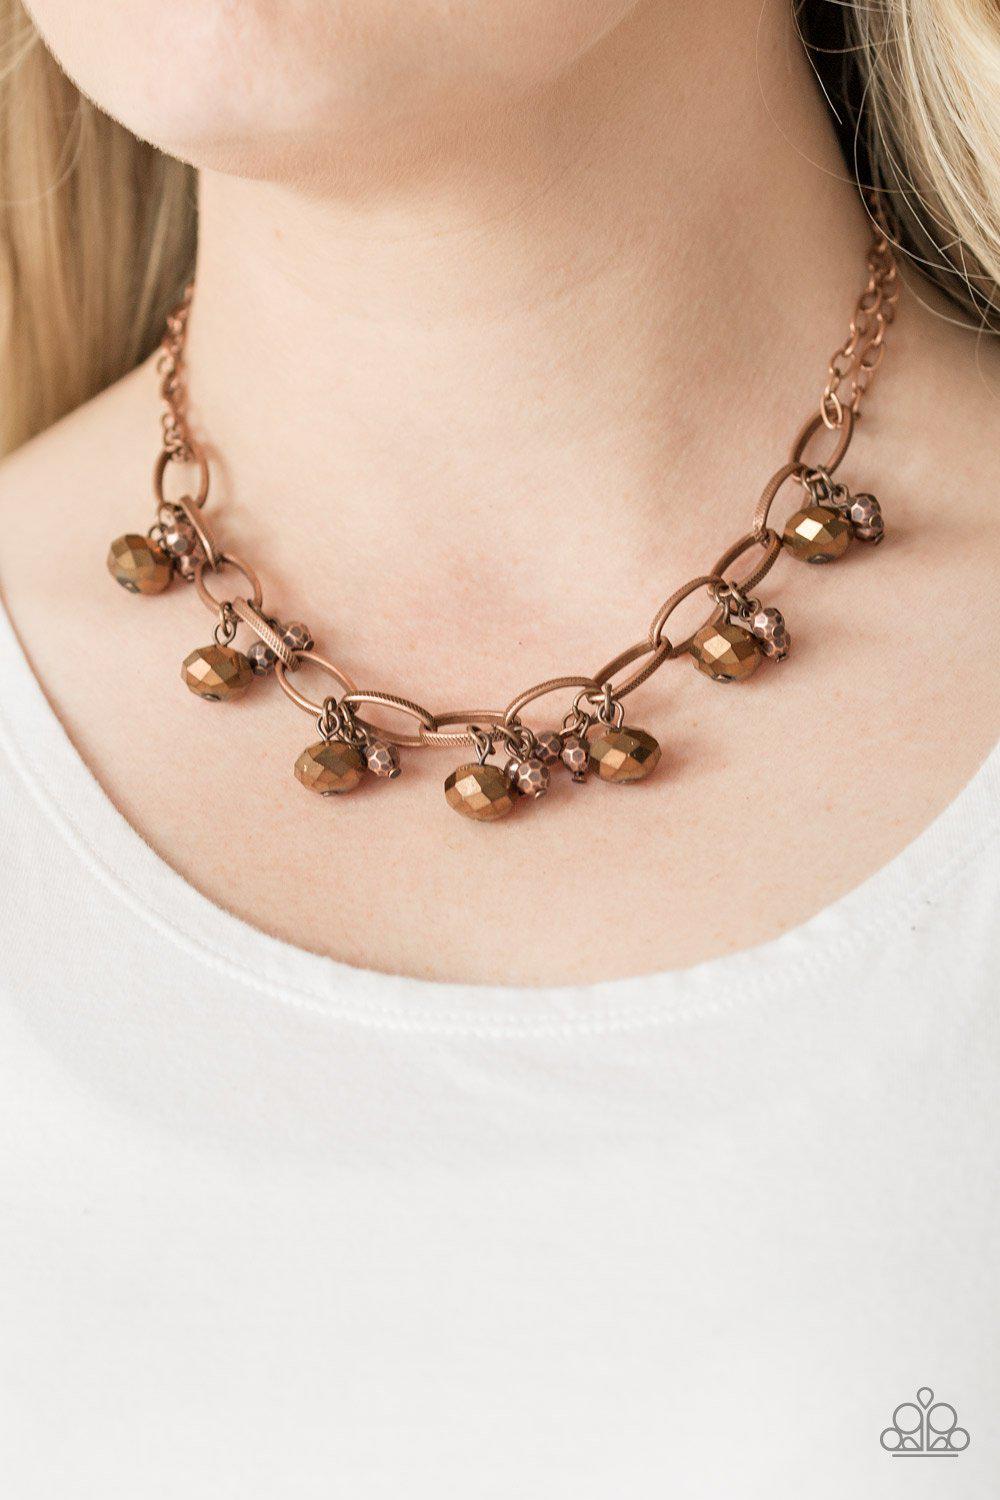 Let's Get This Fashion Show On The Road Copper Necklace - Paparazzi Accessories-CarasShop.com - $5 Jewelry by Cara Jewels